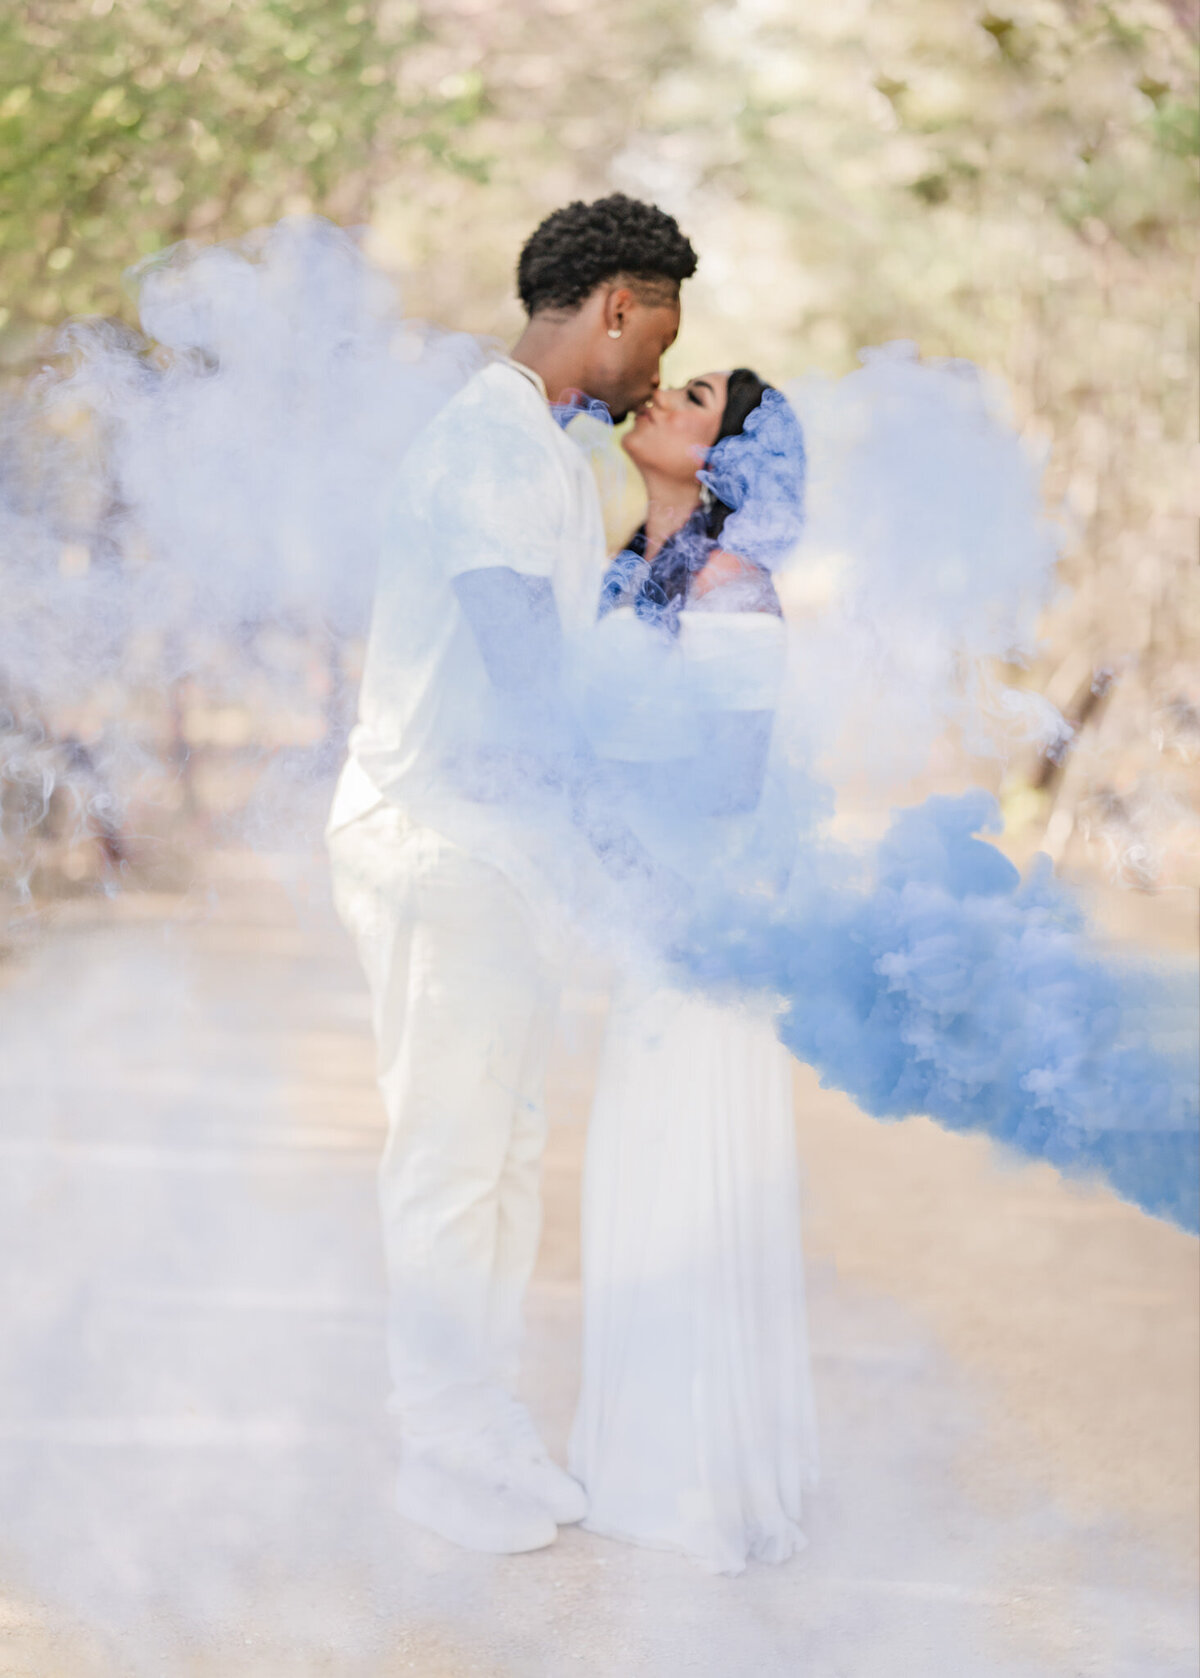 Expecting couple kisses behind gender reveal blue smoke bomb after learning they're having a boy during gender reveal photos at Brackenridge Park in San Antonio.